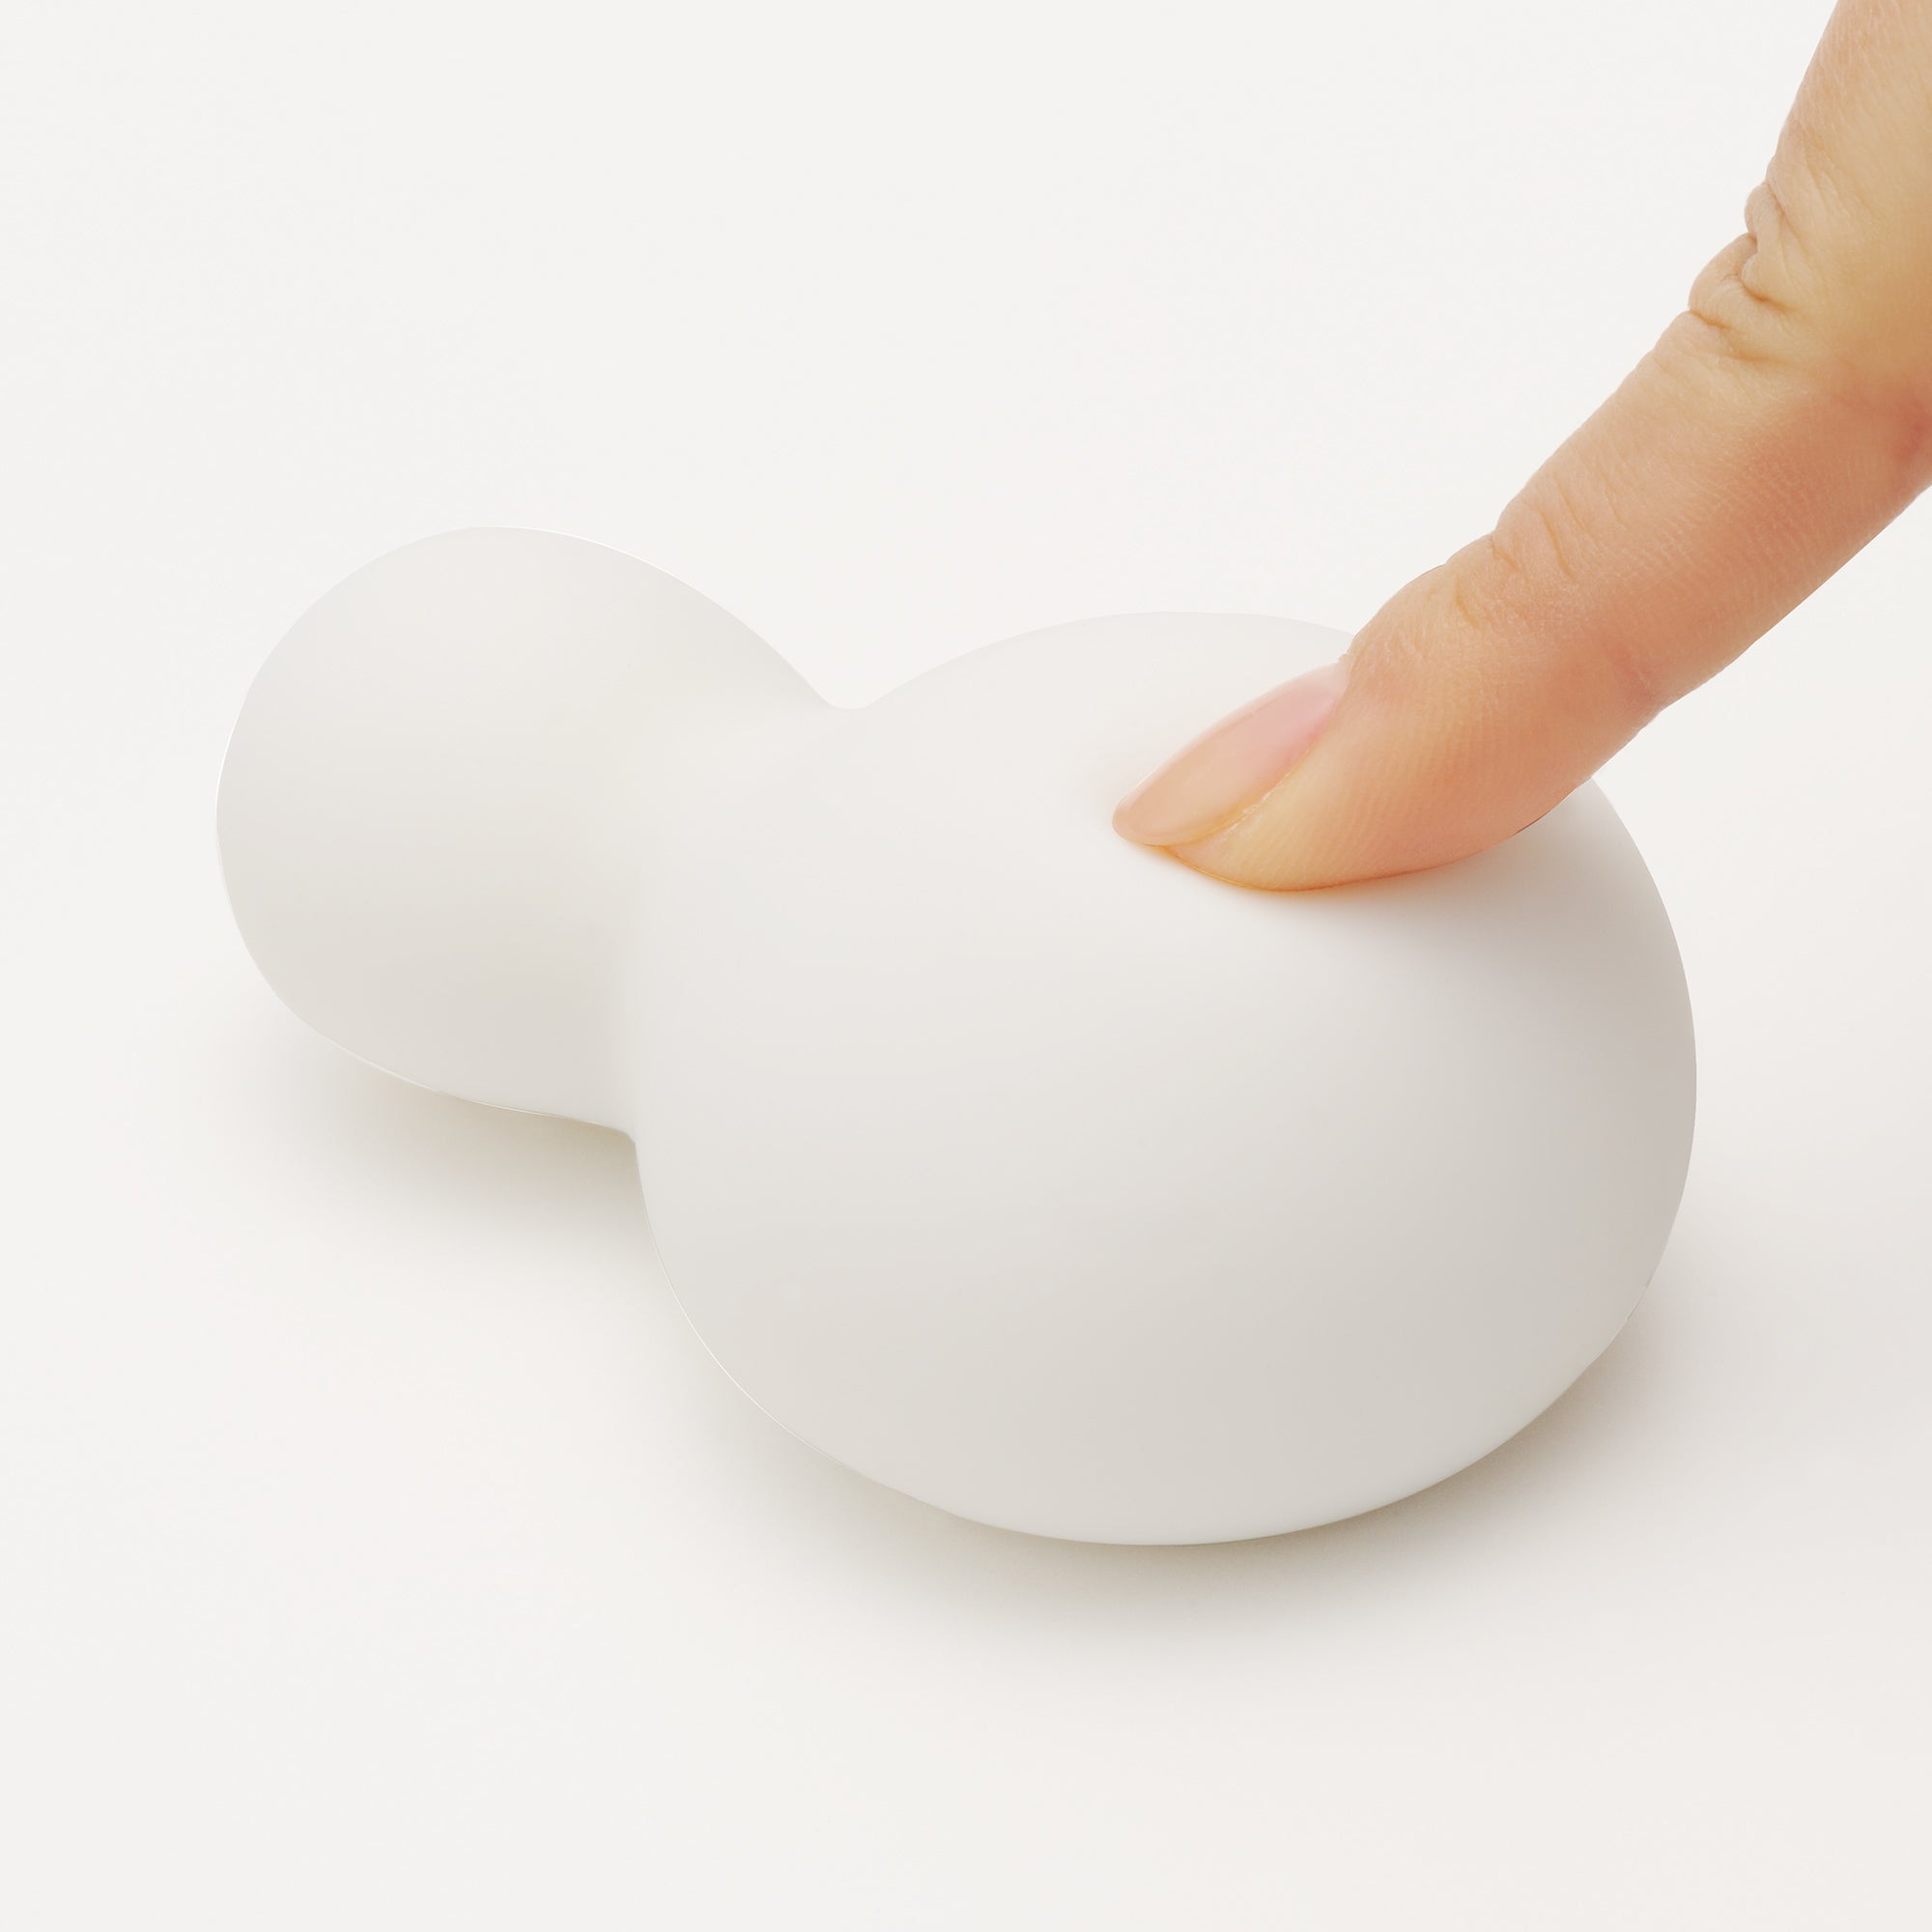 Iroha Yuki, a sophisticated female personal pleasure device designed for ergonomic comfort and intimate enjoyment. With a soft pink hue and graceful curves, this product is available from the UK TENGA STORE and reflects an artful blend of form and function